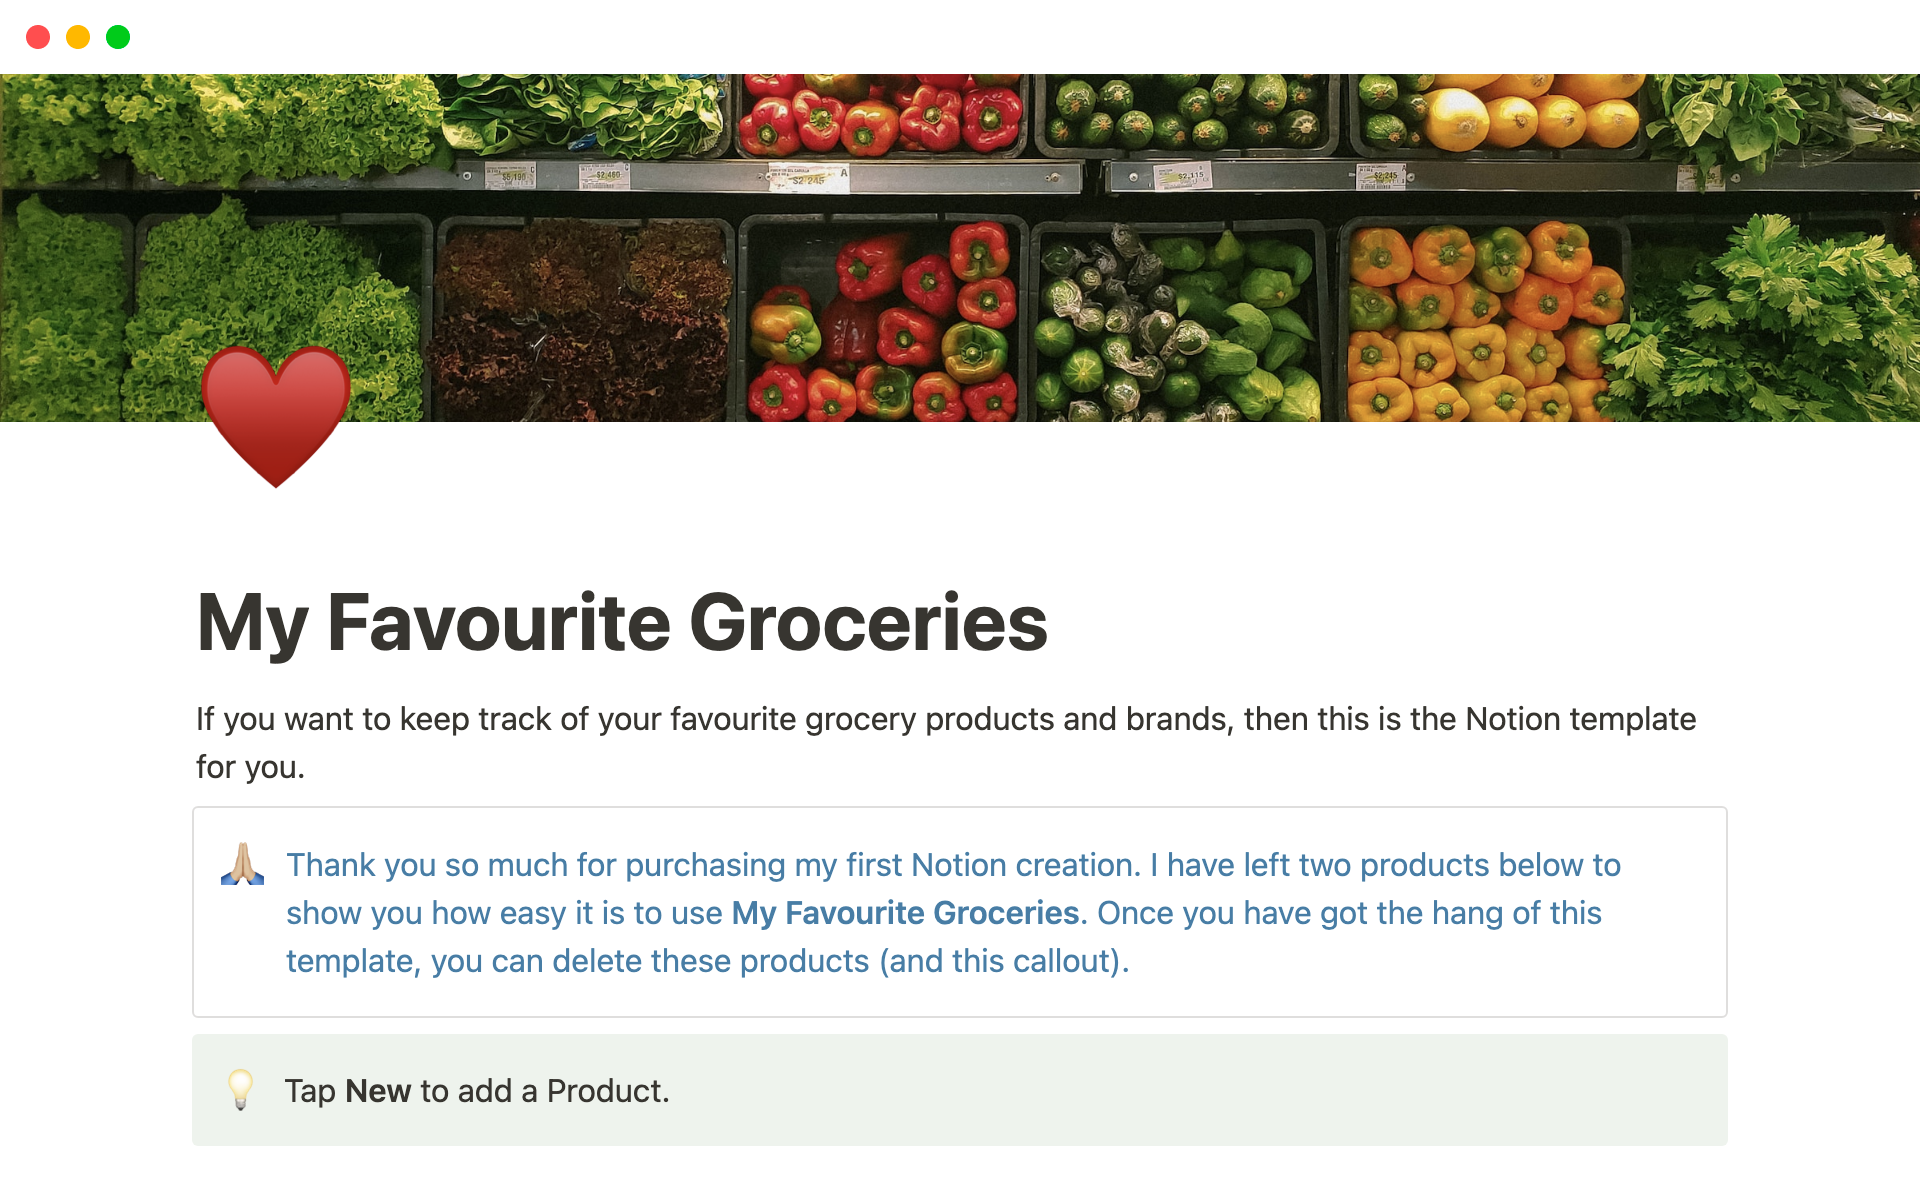 My Favourite Groceries helps you remember all your favourite items from the supermarket.